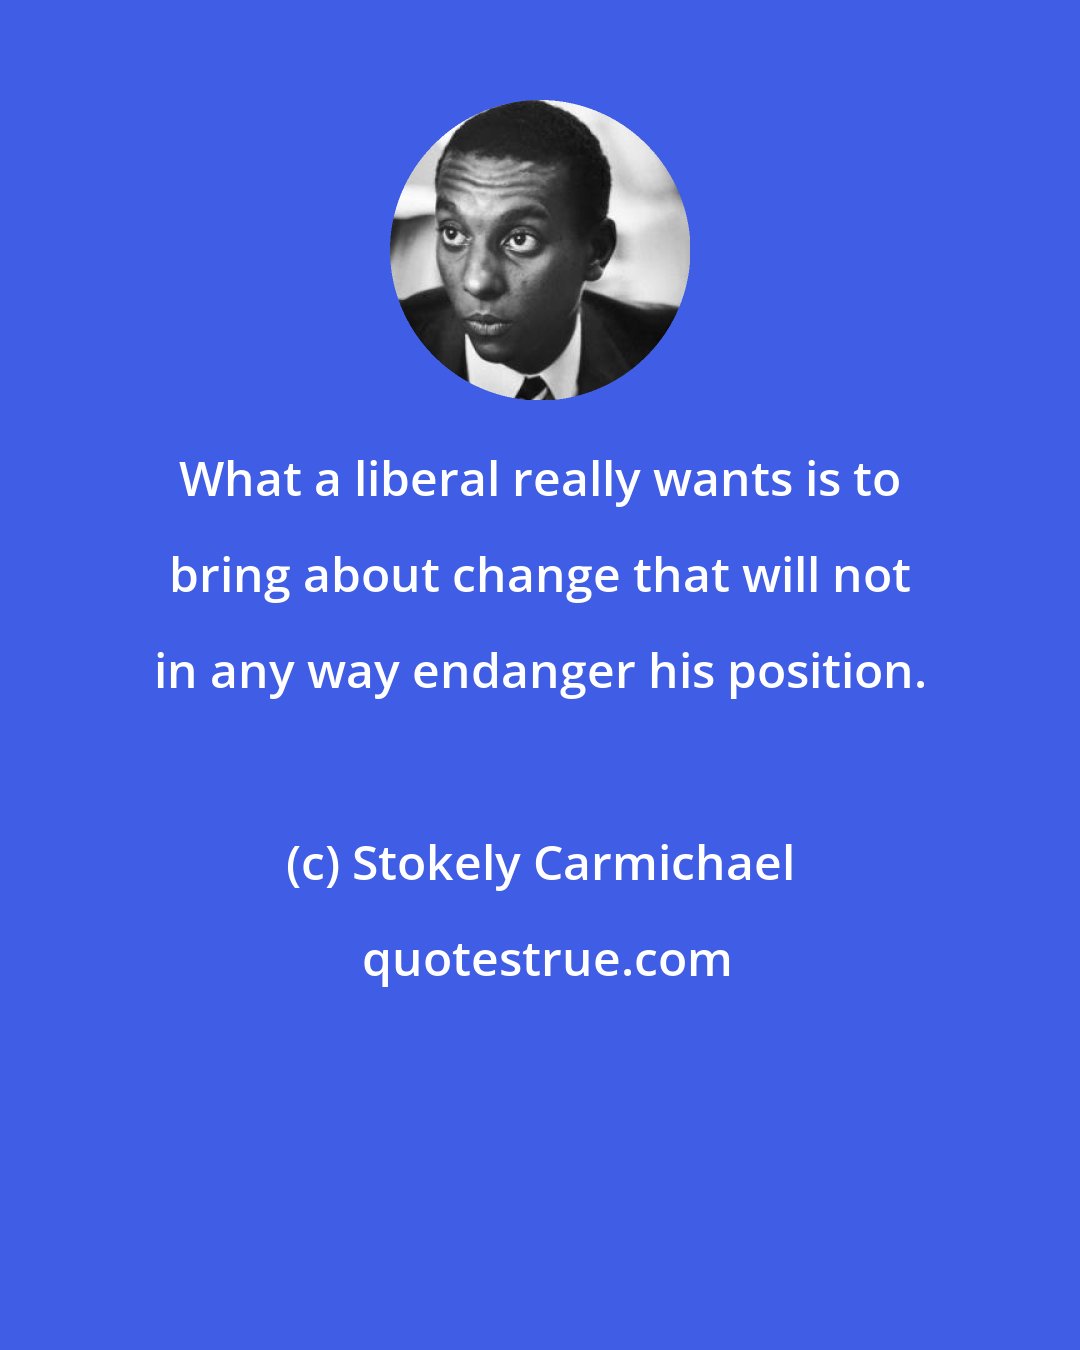 Stokely Carmichael: What a liberal really wants is to bring about change that will not in any way endanger his position.